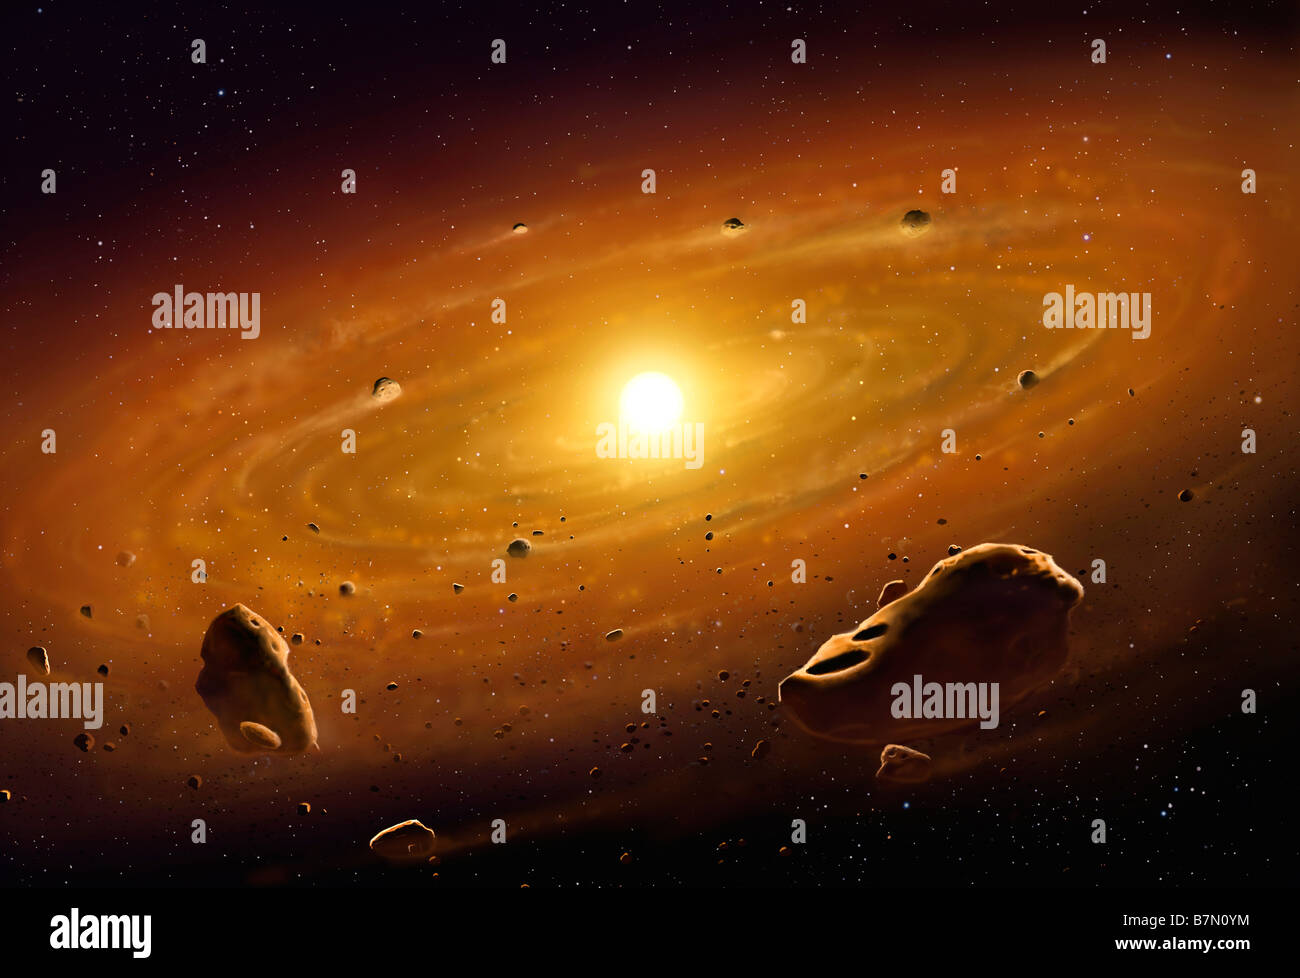 An Artwork Of The Solar System At An Early Stage Of